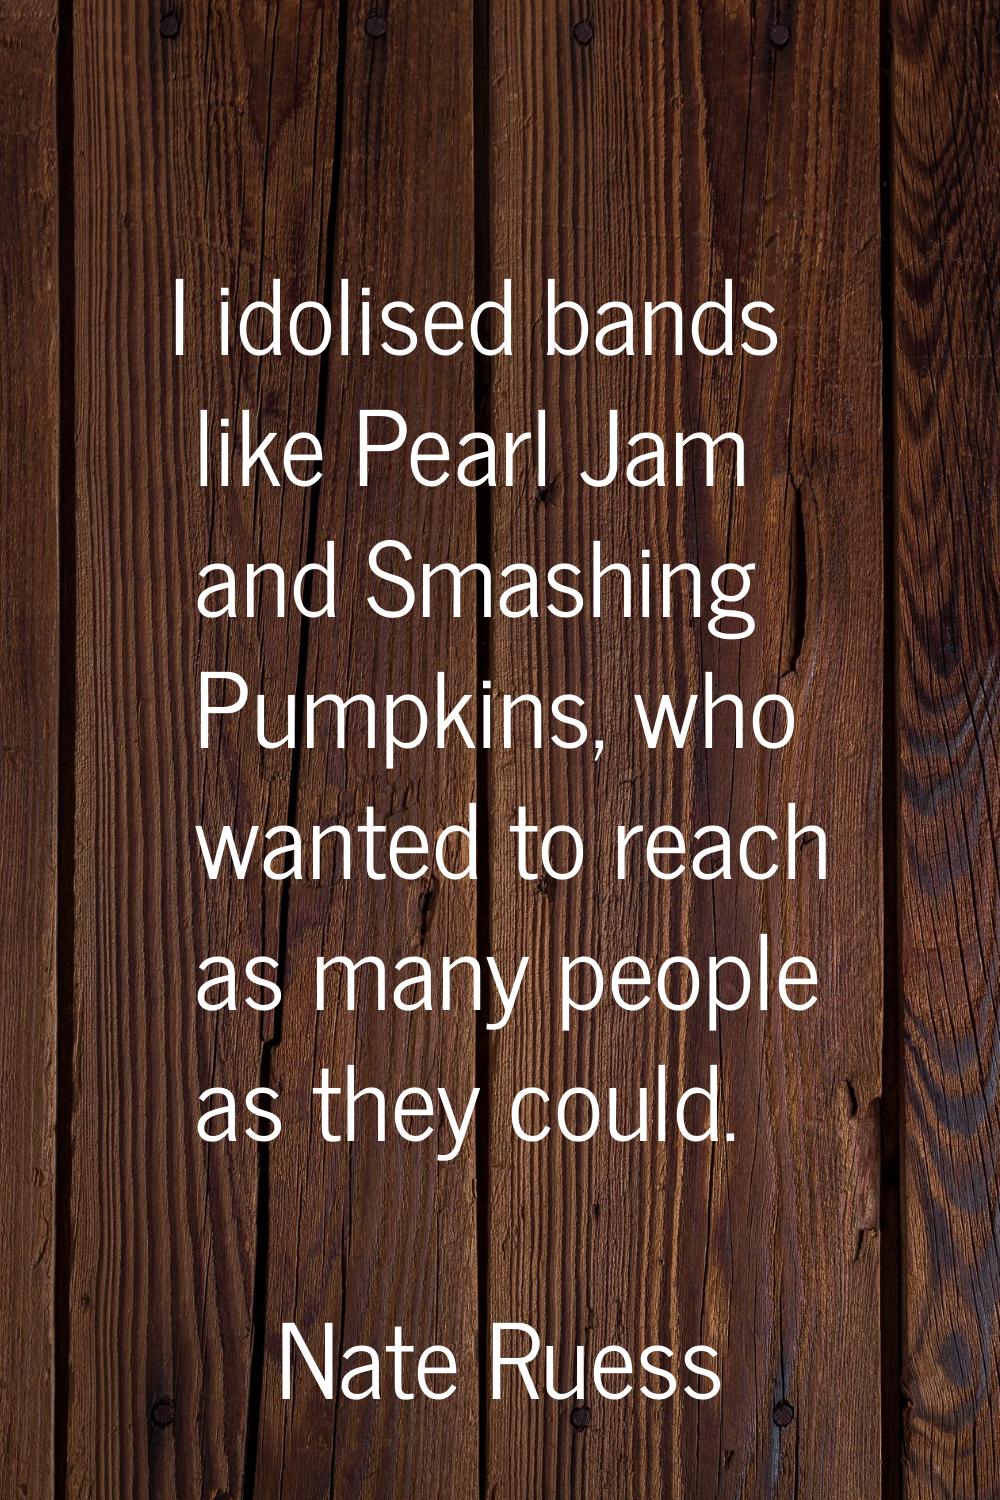 I idolised bands like Pearl Jam and Smashing Pumpkins, who wanted to reach as many people as they c